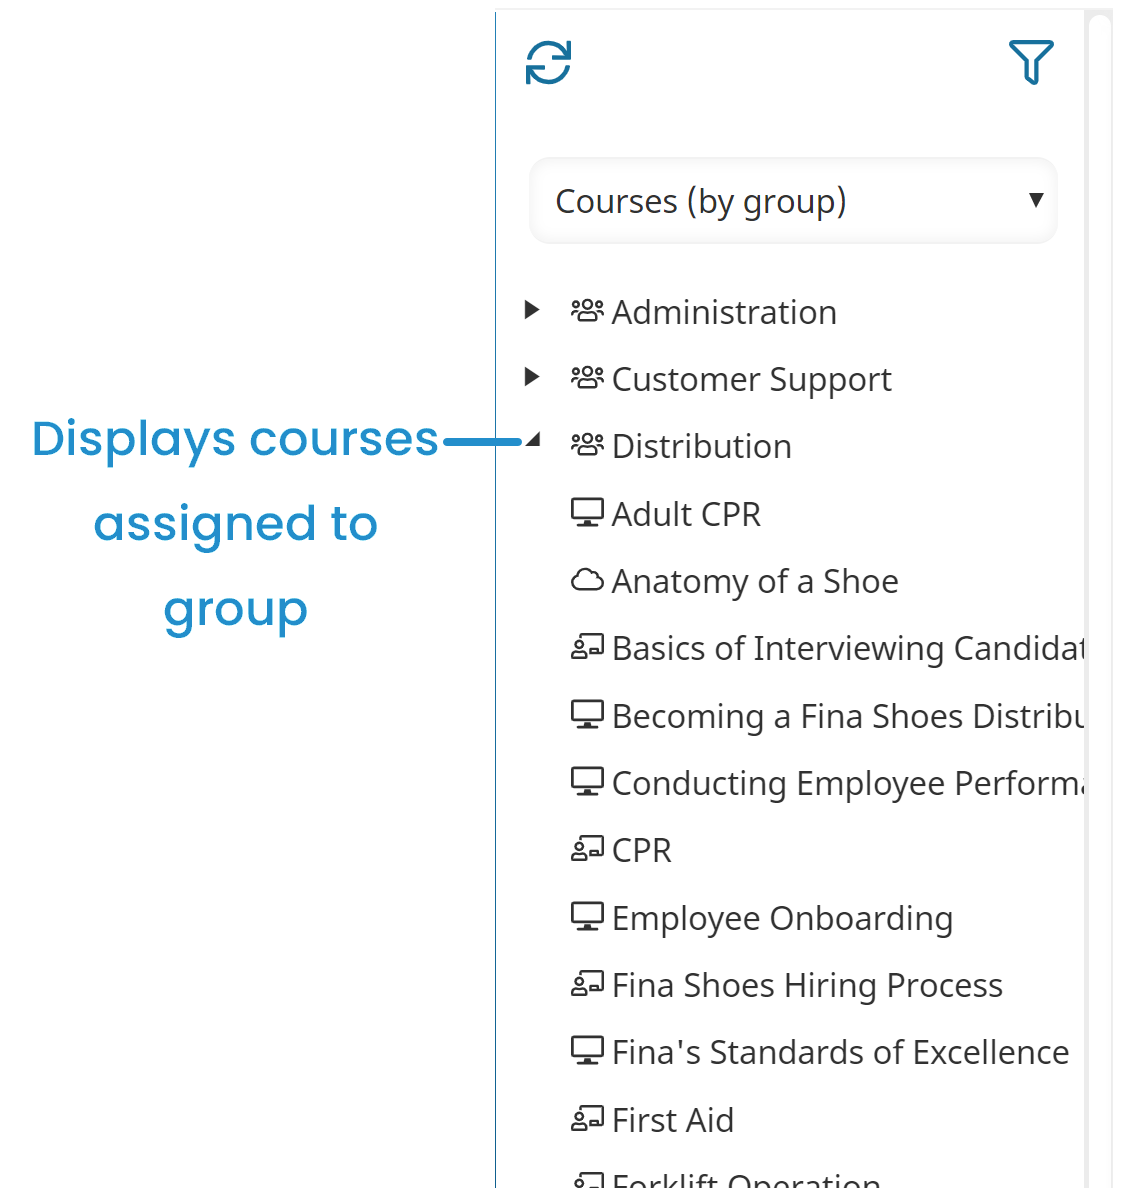 Courses by Group